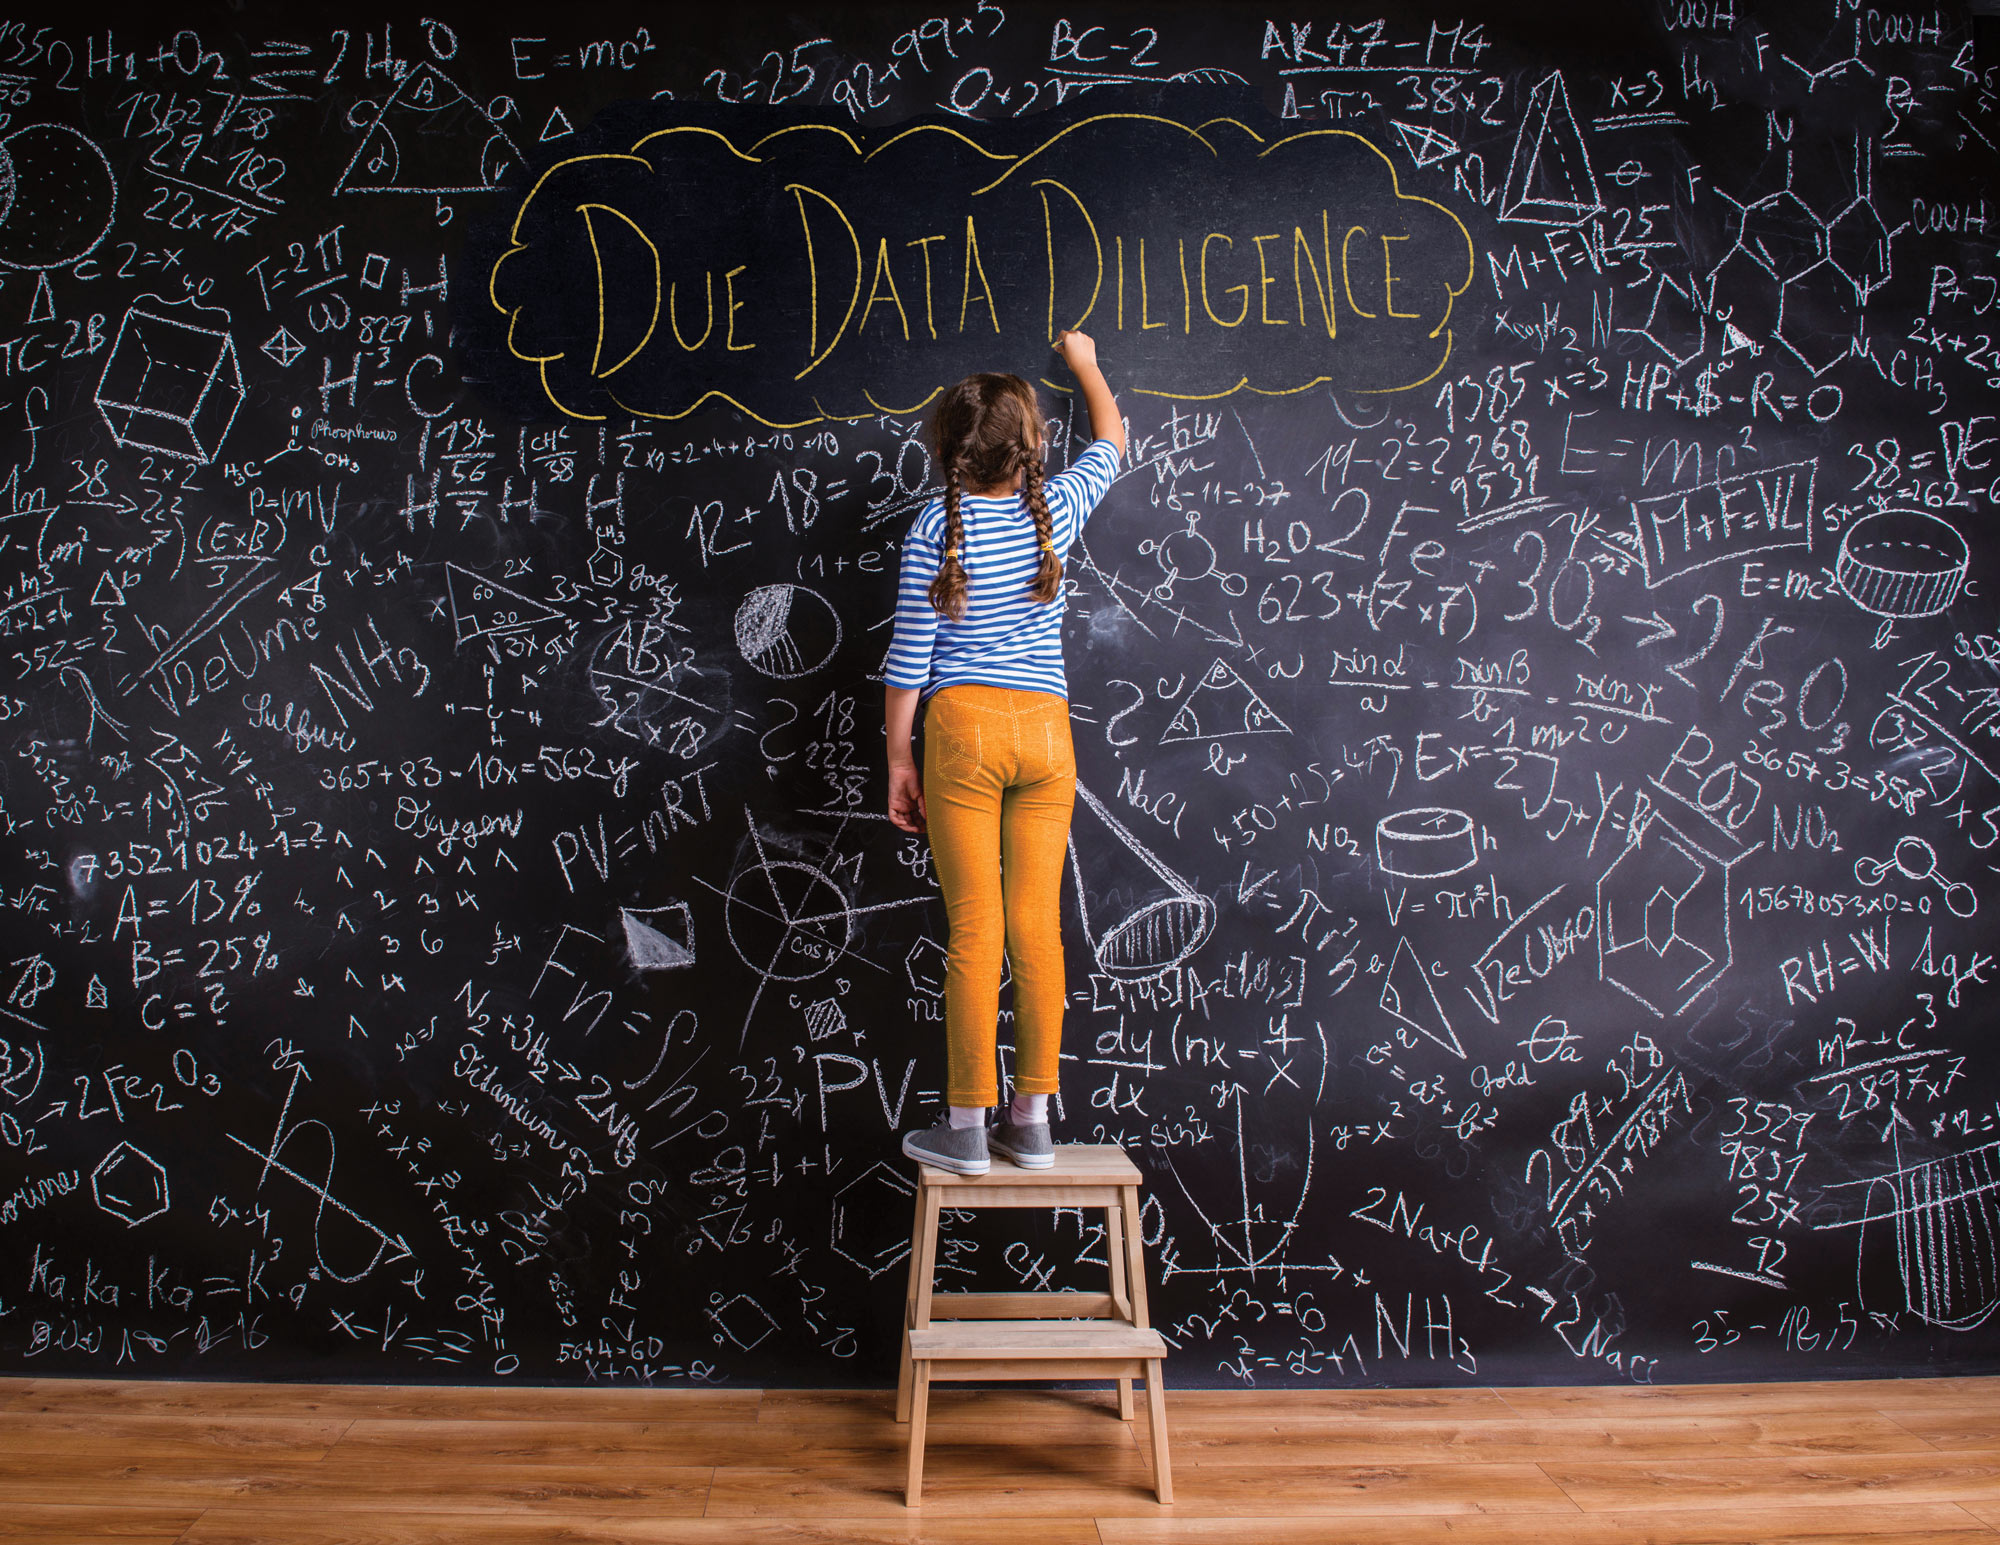 A student in front of a chalk board with lots of writing and the title Due Data Diligence